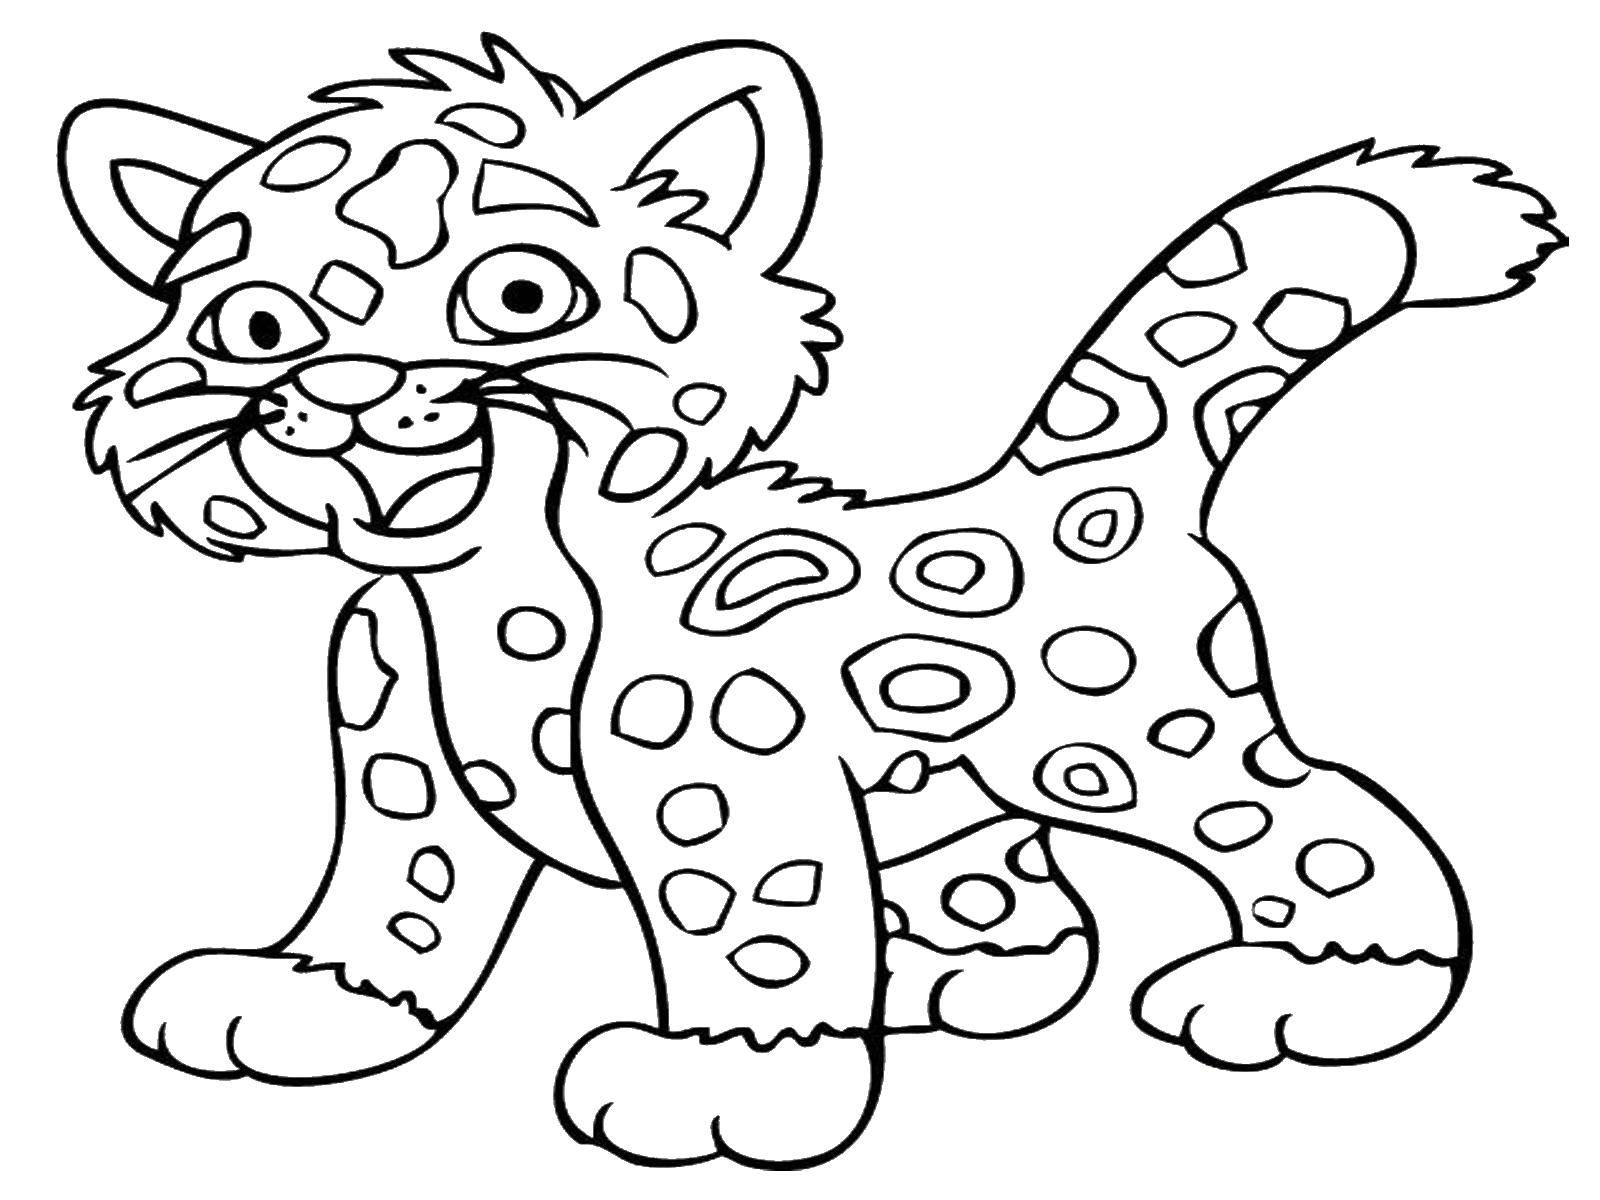 Coloring A leopard. Category animals. Tags:  Animals, leopard.